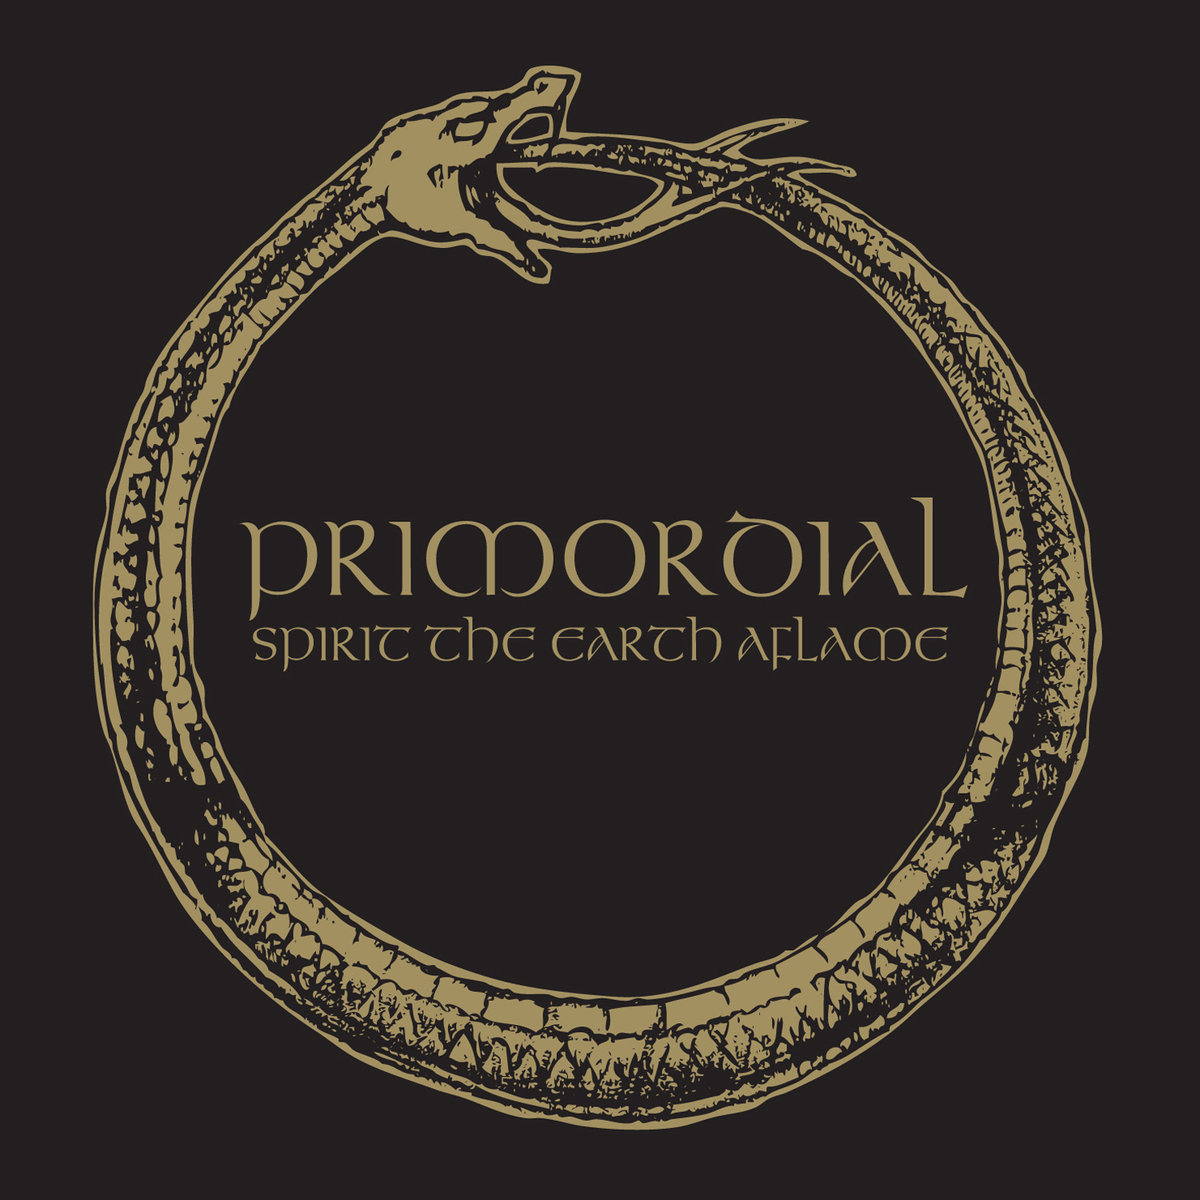 High Resolution Wallpaper | Primordial 1200x1200 px